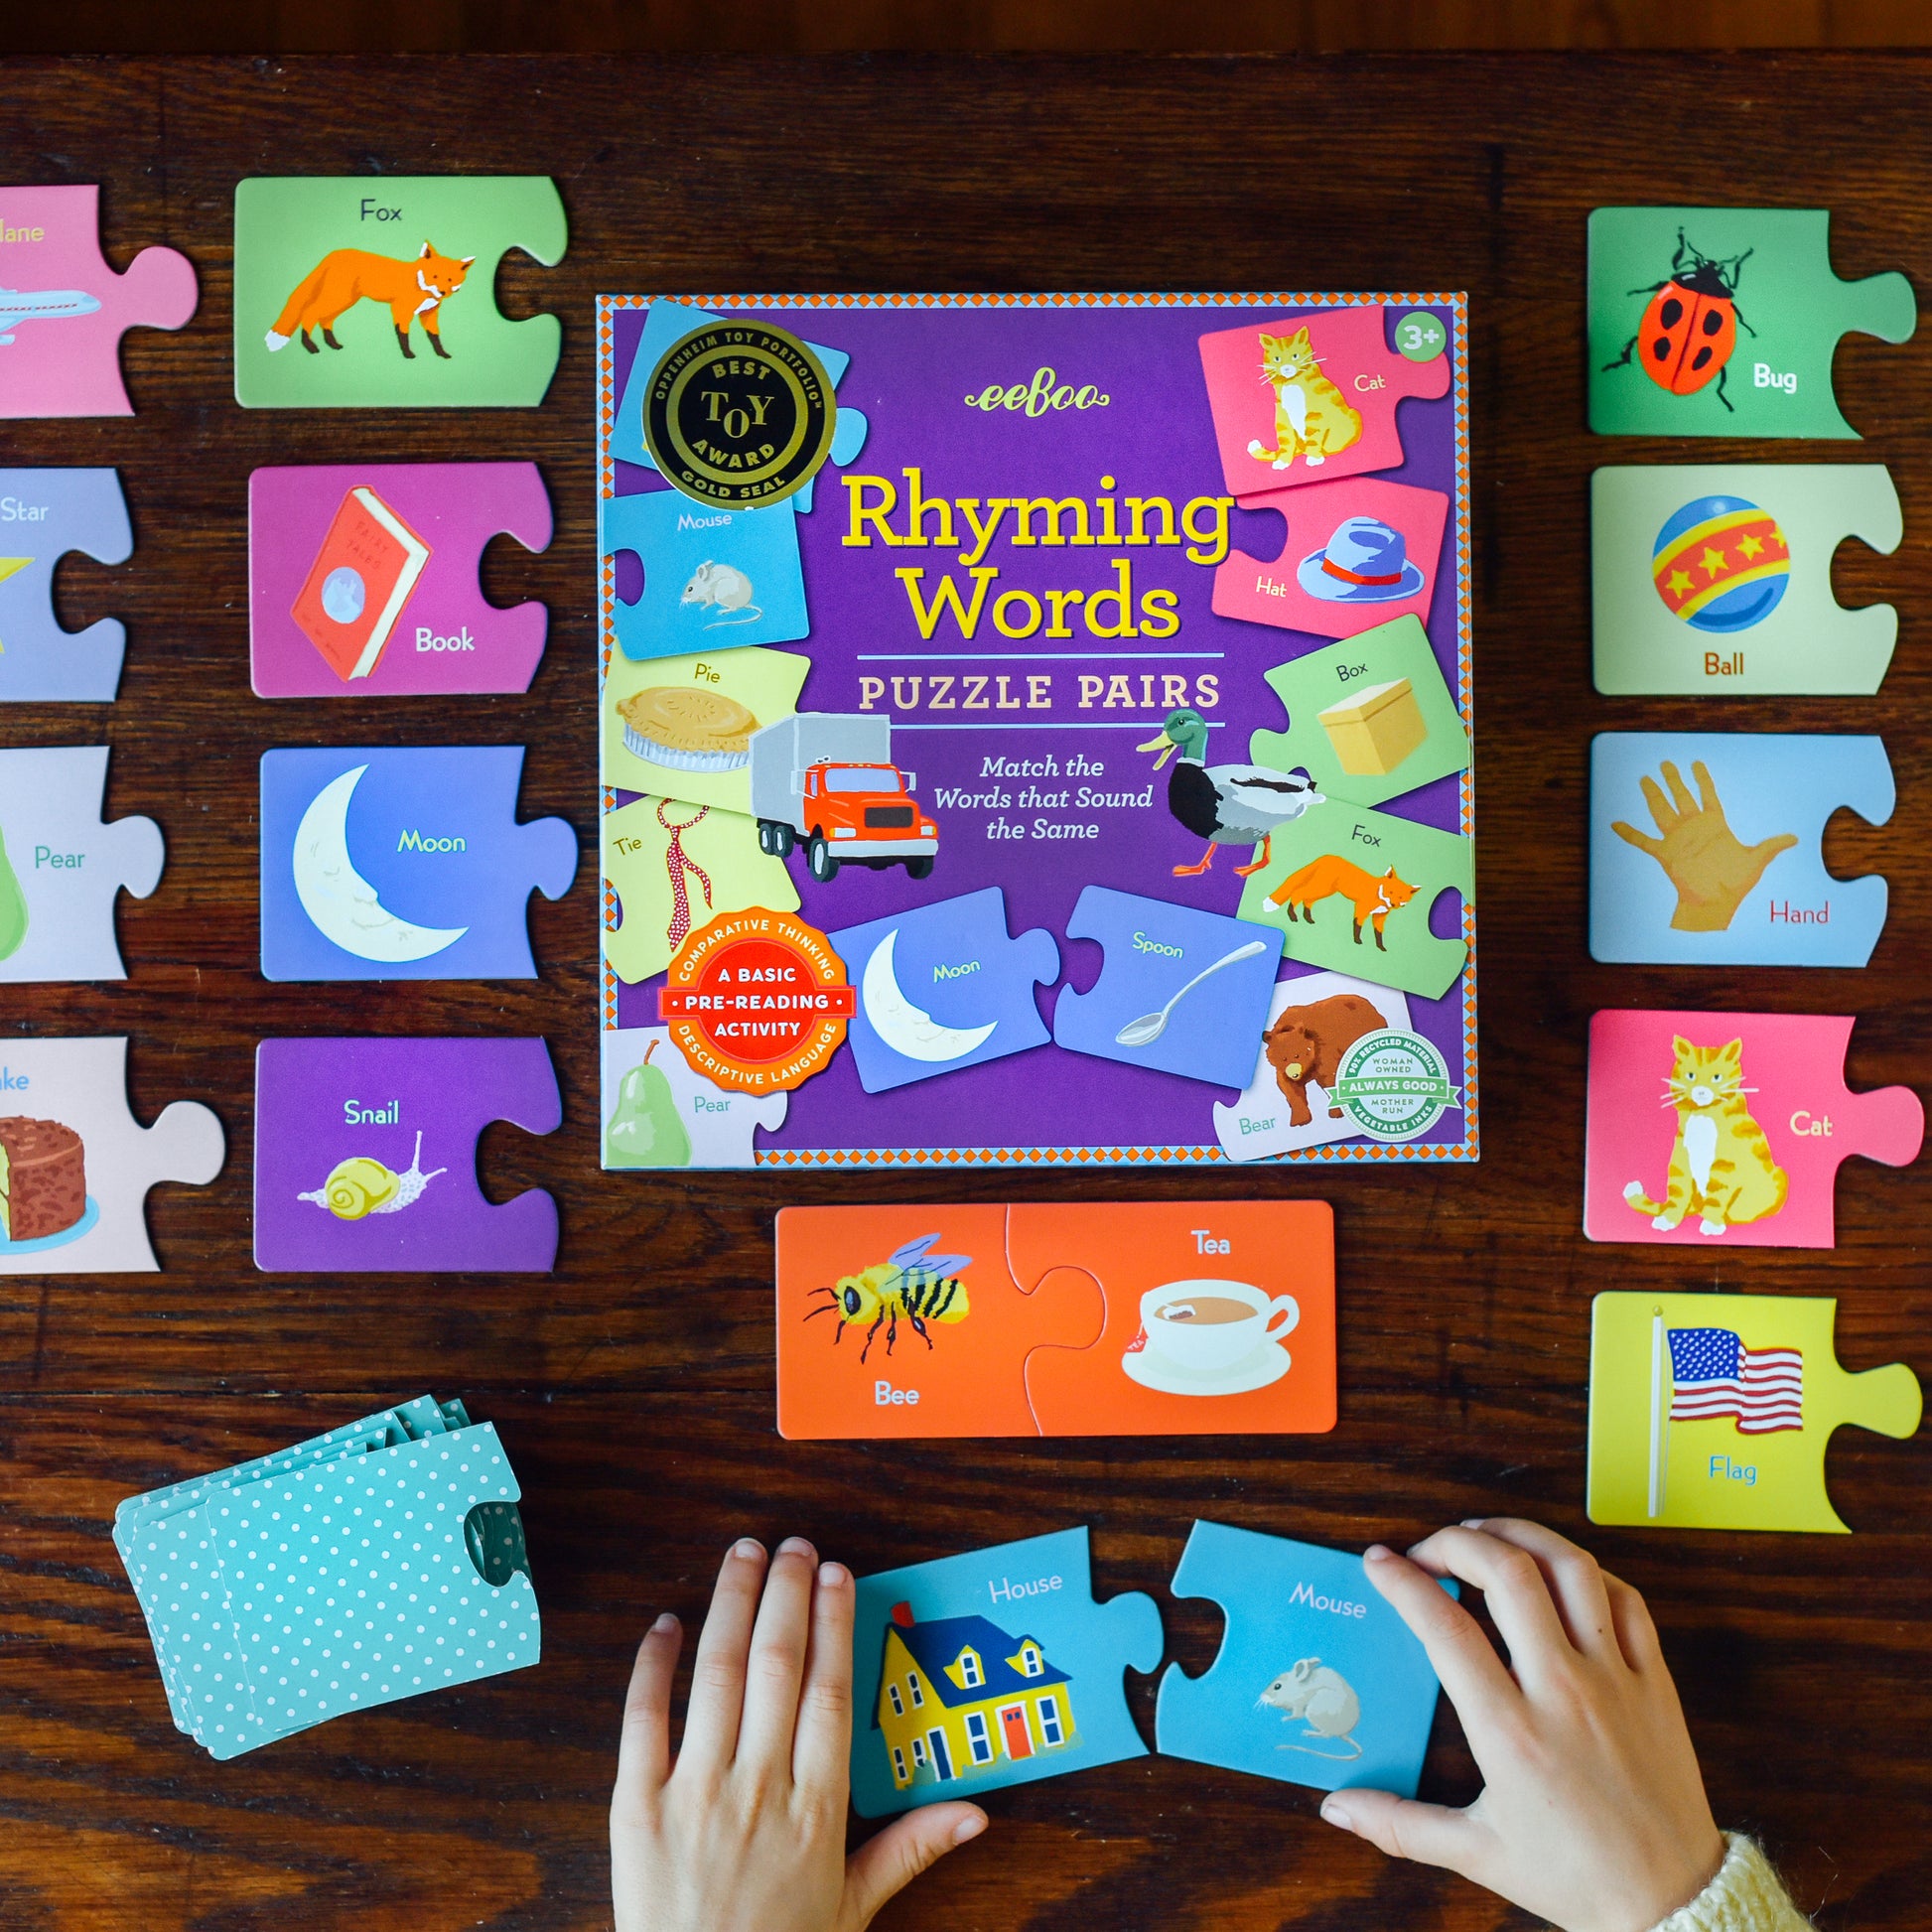 Rhyming Words Educational Puzzle Pairs eeBoo for Kids Ages 3+